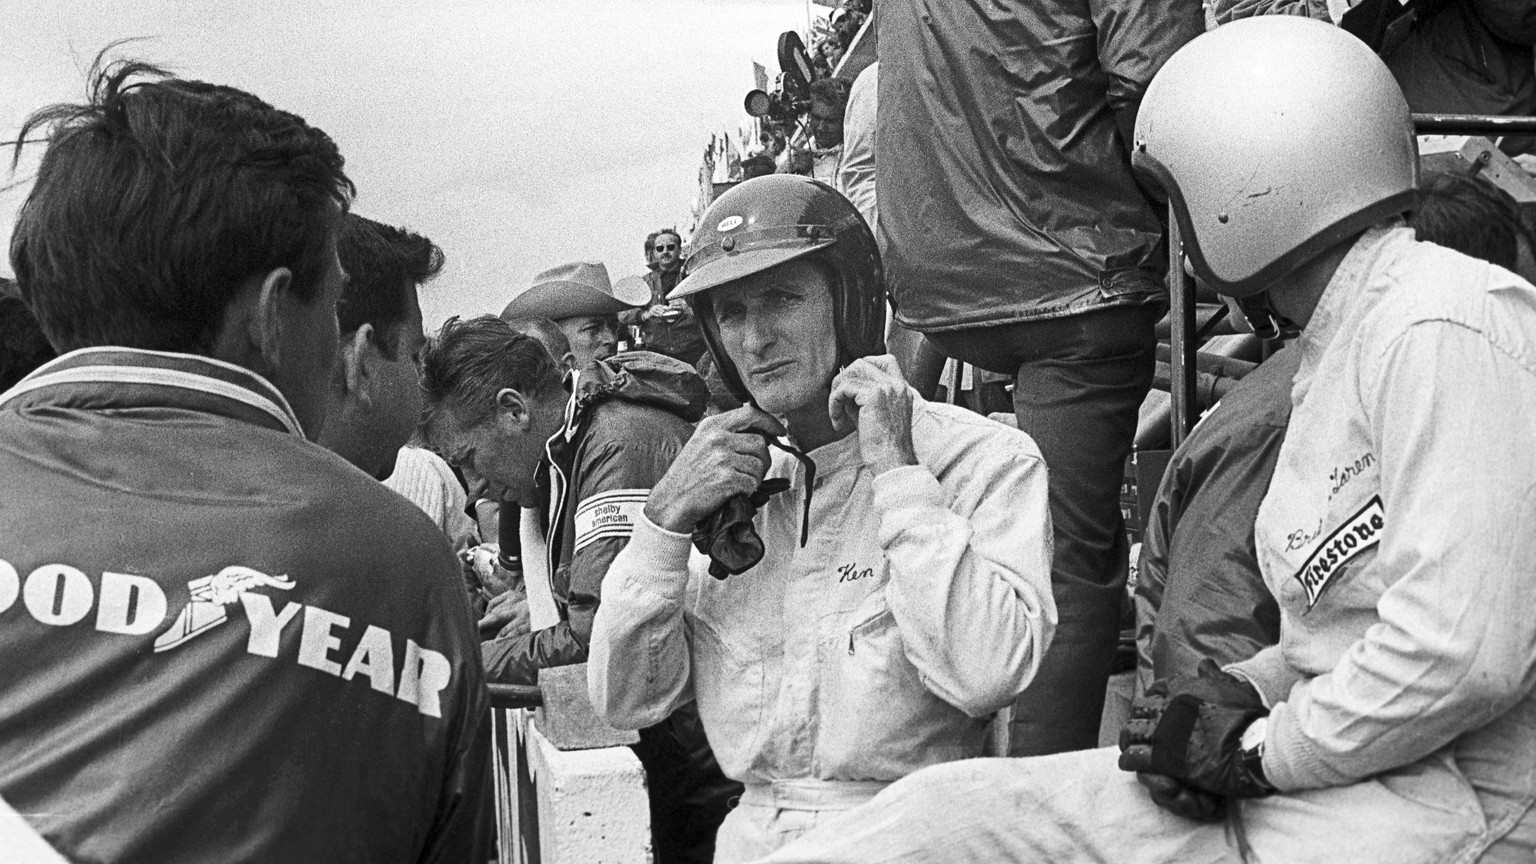 Ken Miles, Bruce McLaren, Ford Mk II, 24 Hours of Le Mans, Le Mans, 19 June 1966. The controversial finish of the 1966 Le Mans 24 Hours, with the two Ford Mk II of Ken Miles/Denny Hulme and Bruce McLa ...